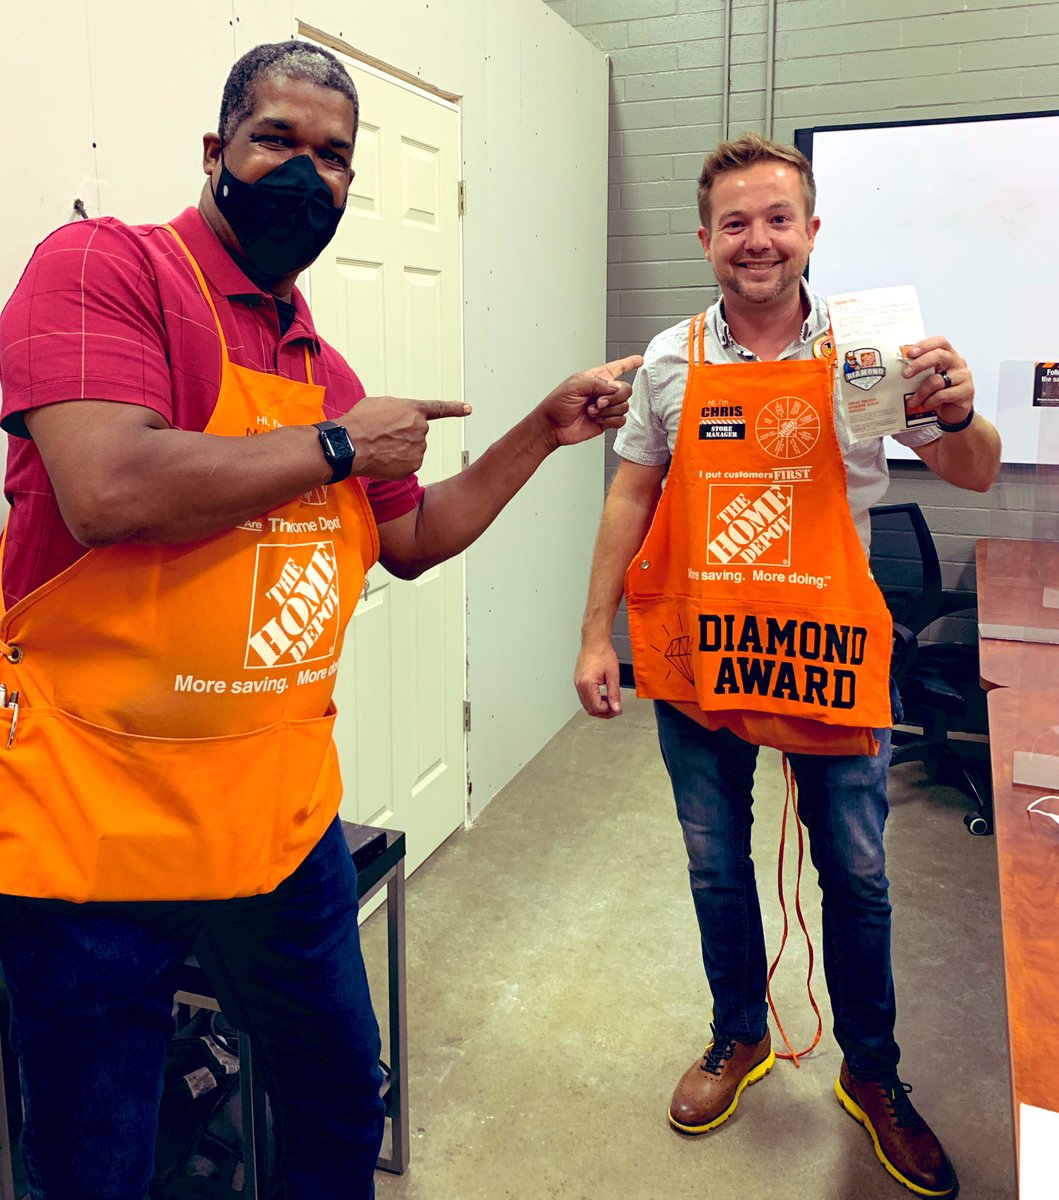 A very HUGE Congratulations to our AMAZING 🌟 STORE MANAGER Chris Caples on achieving his DIAMOND 💎 MILESTONE AWARD!! This is a huge accomplishment and we appreciate all you do!!! Welcome to the 3817 DIAMOND CLUB 💎!!!!